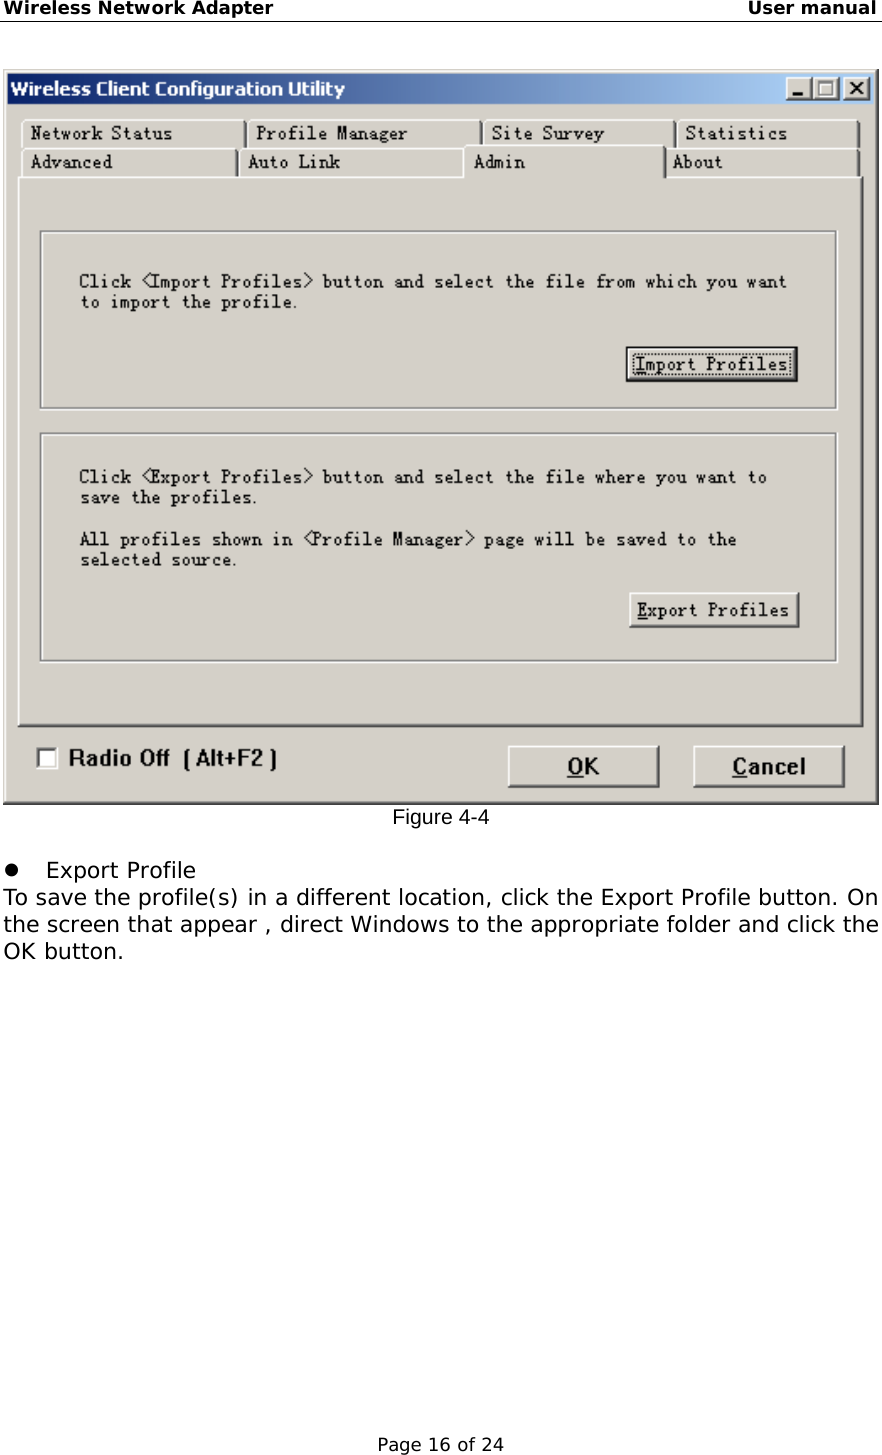 Wireless Network Adapter                                                    User manual Page 16 of 24  Figure 4-4    Export Profile To save the profile(s) in a different location, click the Export Profile button. On the screen that appear , direct Windows to the appropriate folder and click the OK button. 